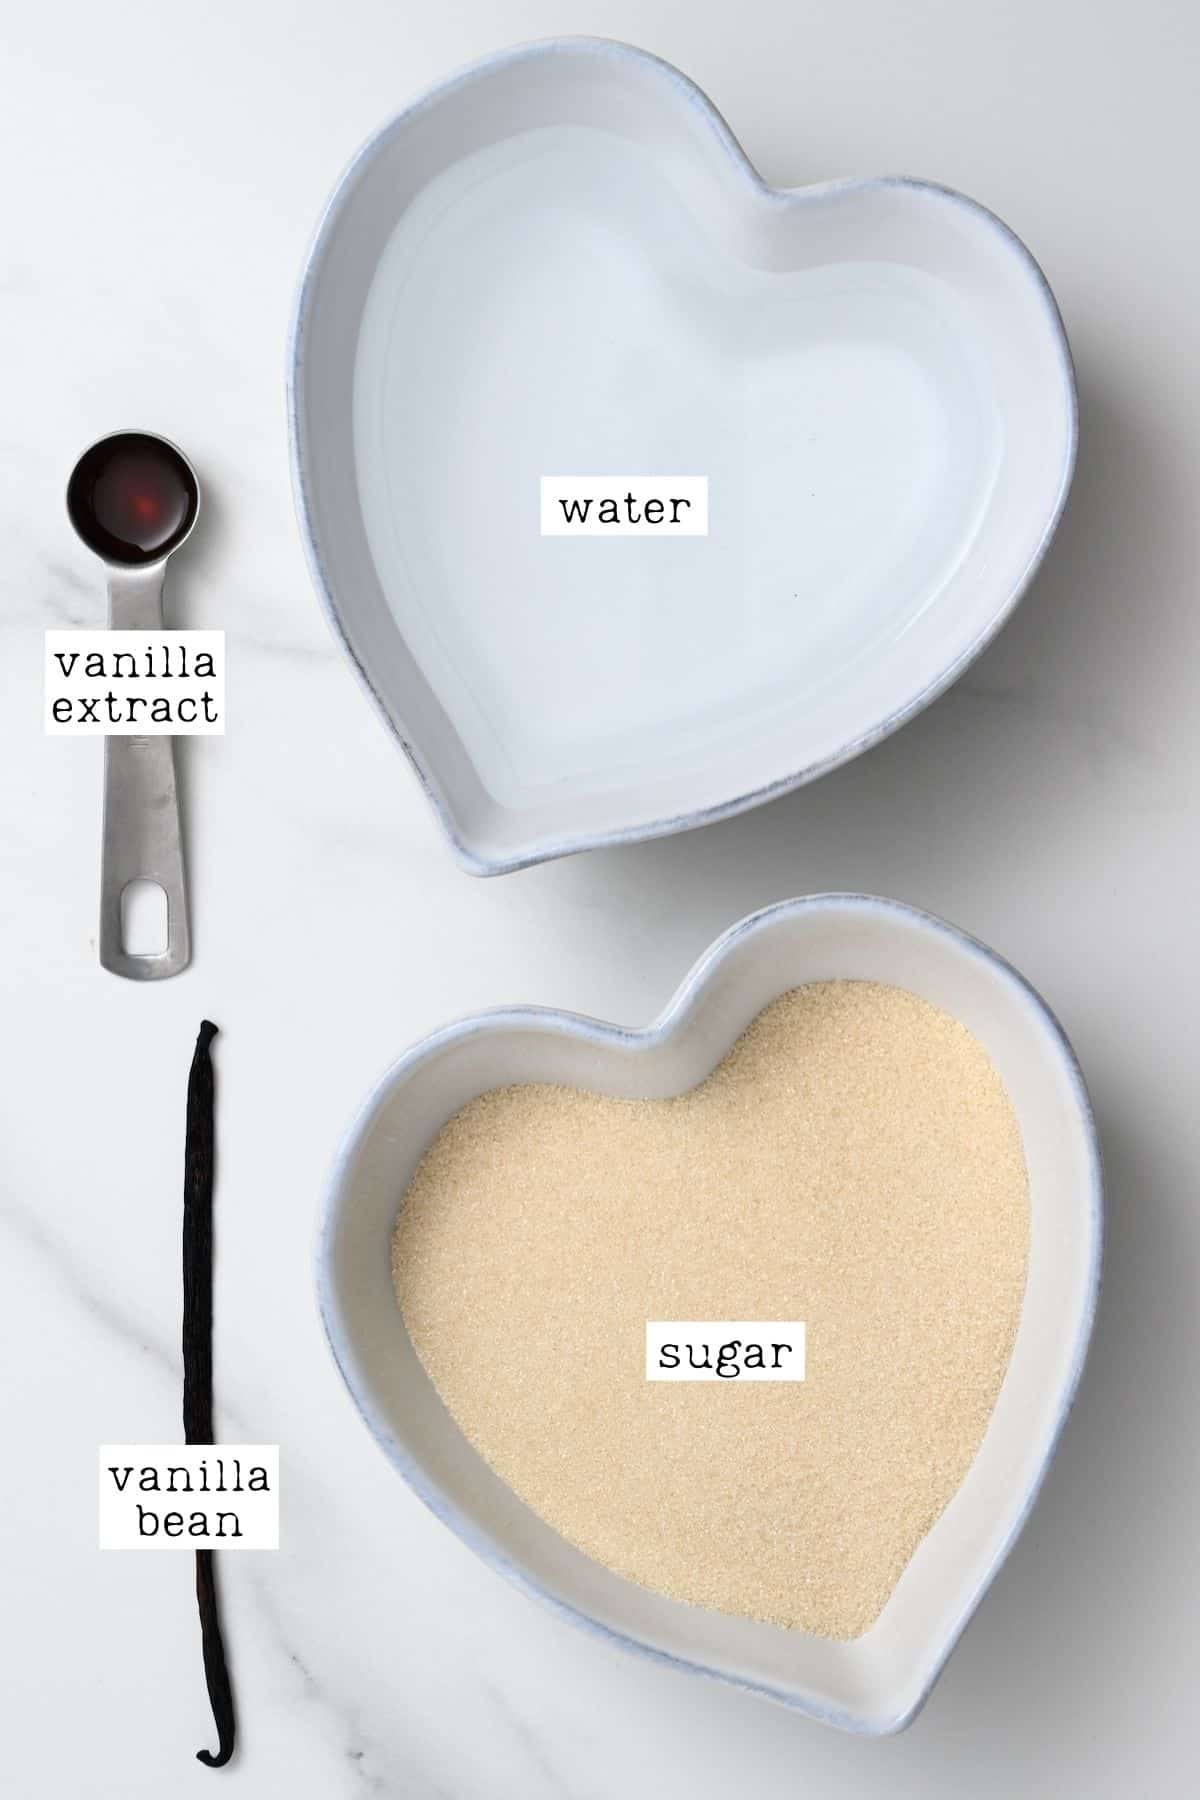 Ingredients for vanilla syrup